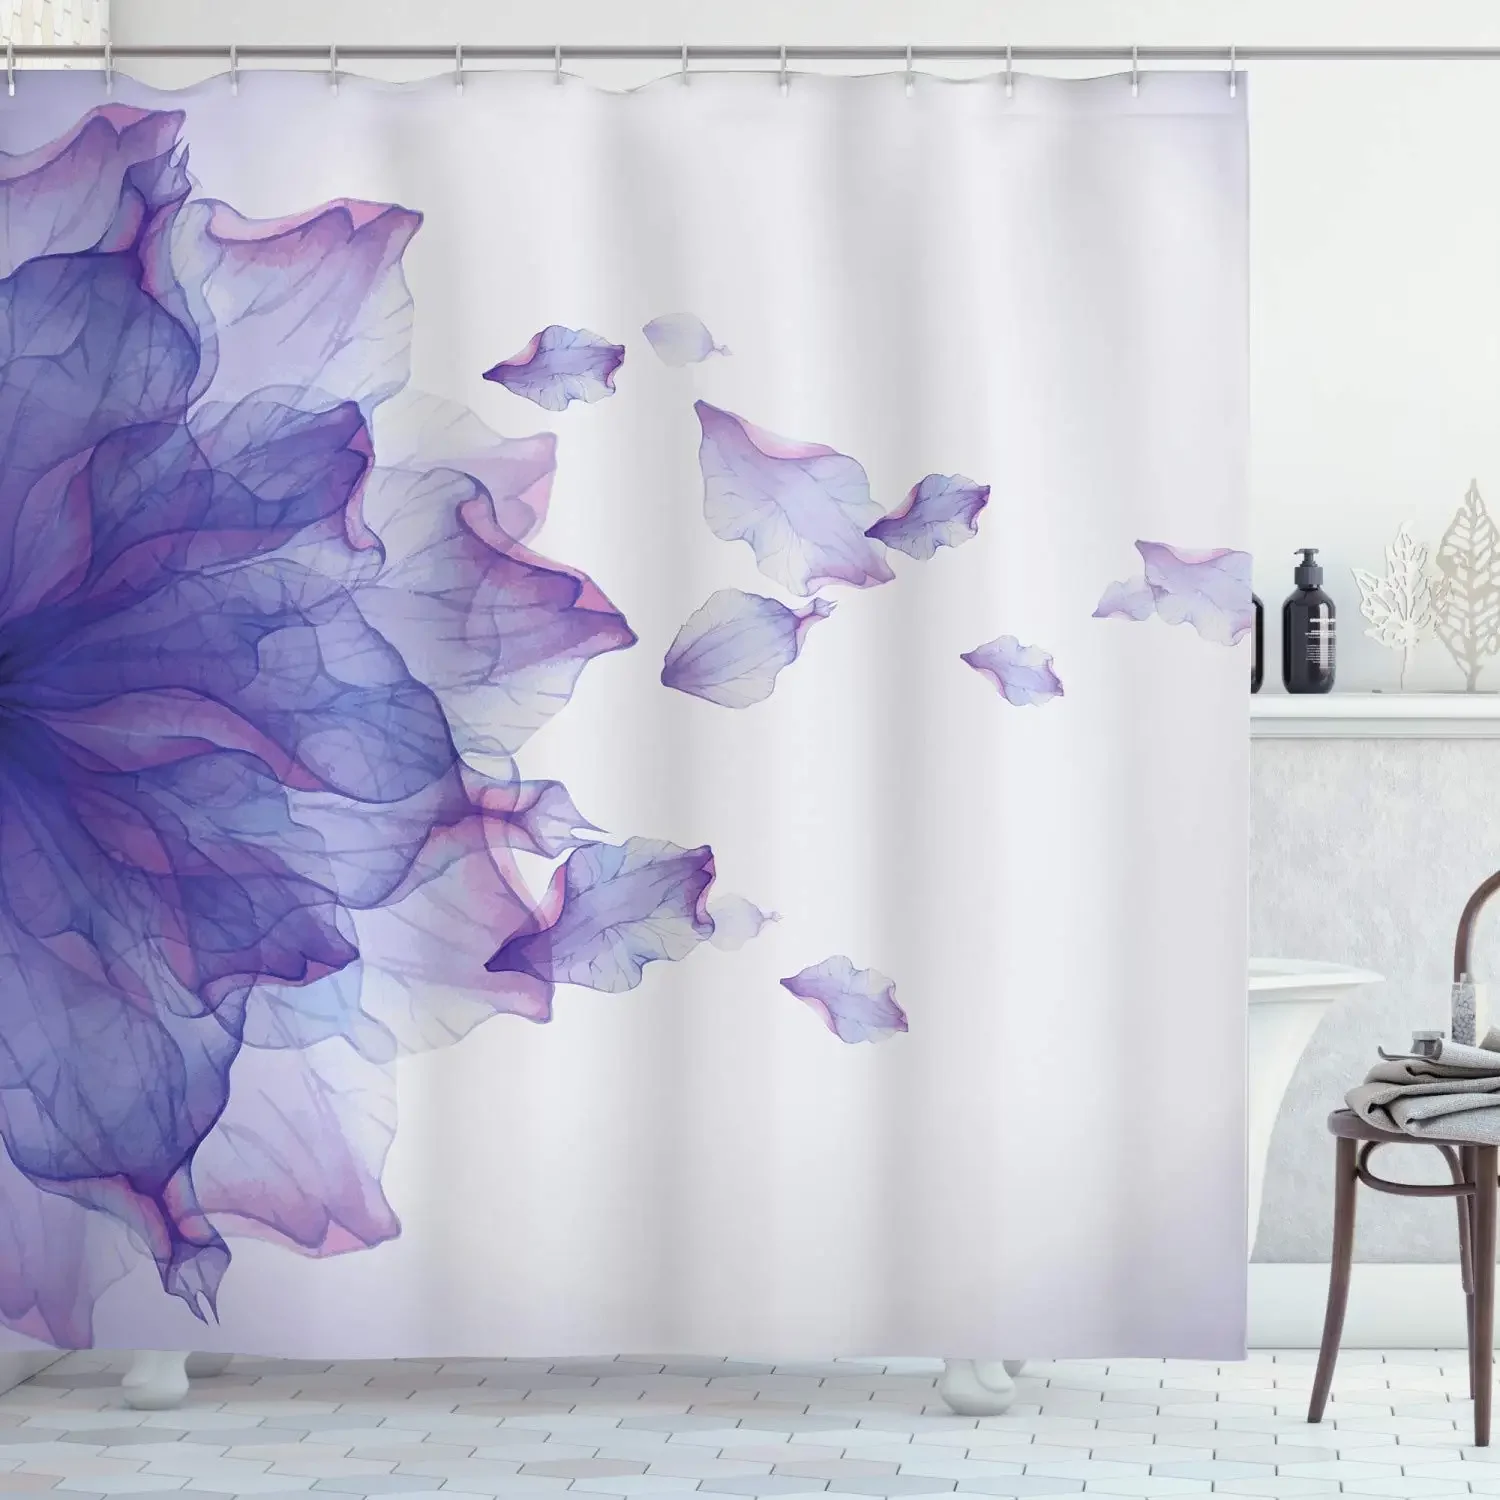 

Flower Shower Curtain,Abstract Modern Futuristic Image with Water Like Colored Artwork Polyester Bathroom Curtains Bathtub Decor